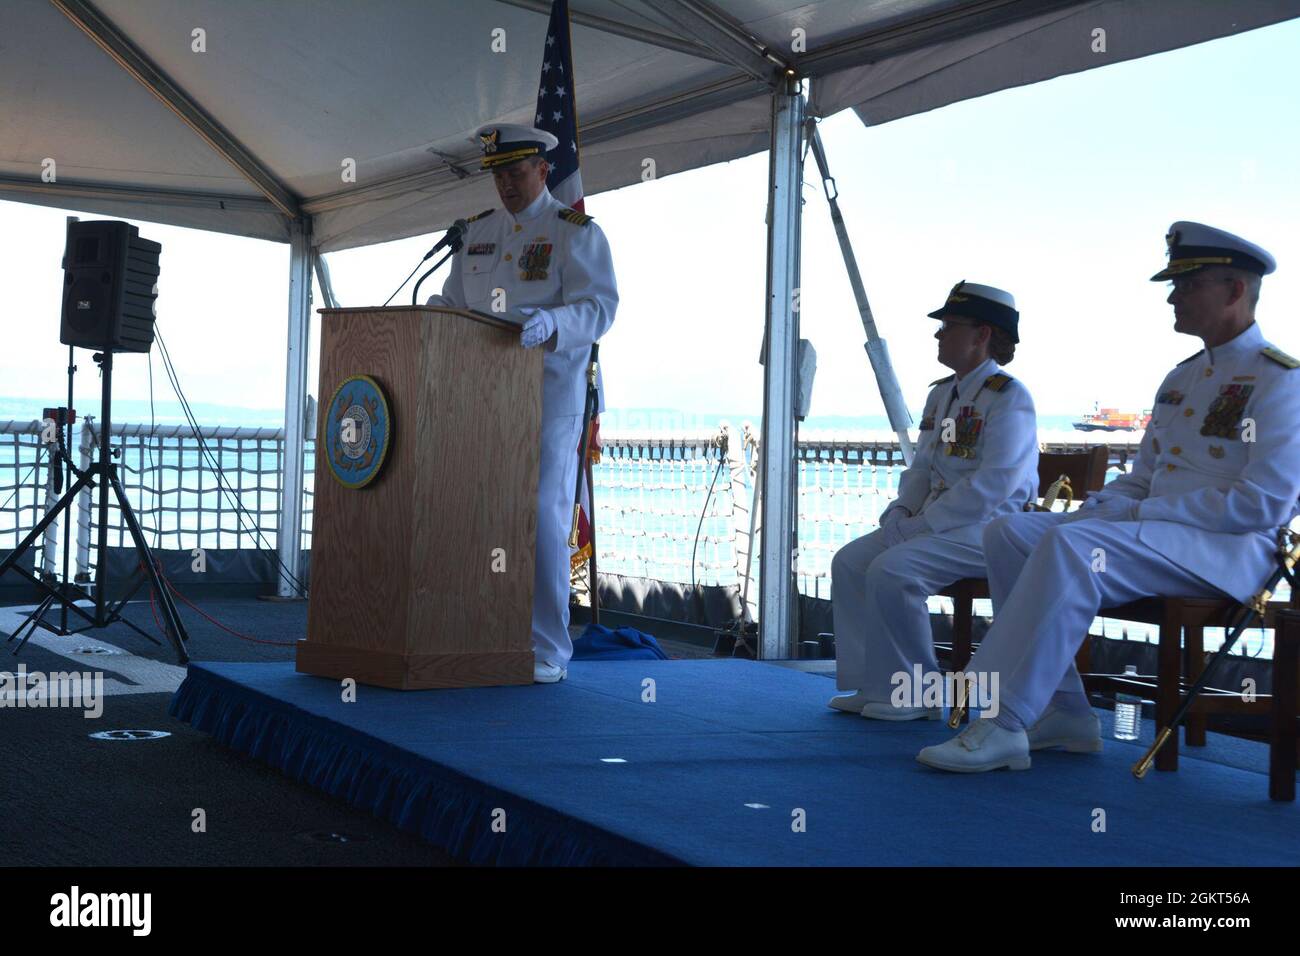 Capt. Kenneth J. Boda speaks during the Coast Guard Cutter Healy’s (WAGB 20) change of command ceremony aboard the cutter moored at Base Seattle, June 25, 2021. Boda relieved Capt. Mary Ellen J. Durley as Healy’s commanding officer during the ceremony. Stock Photo